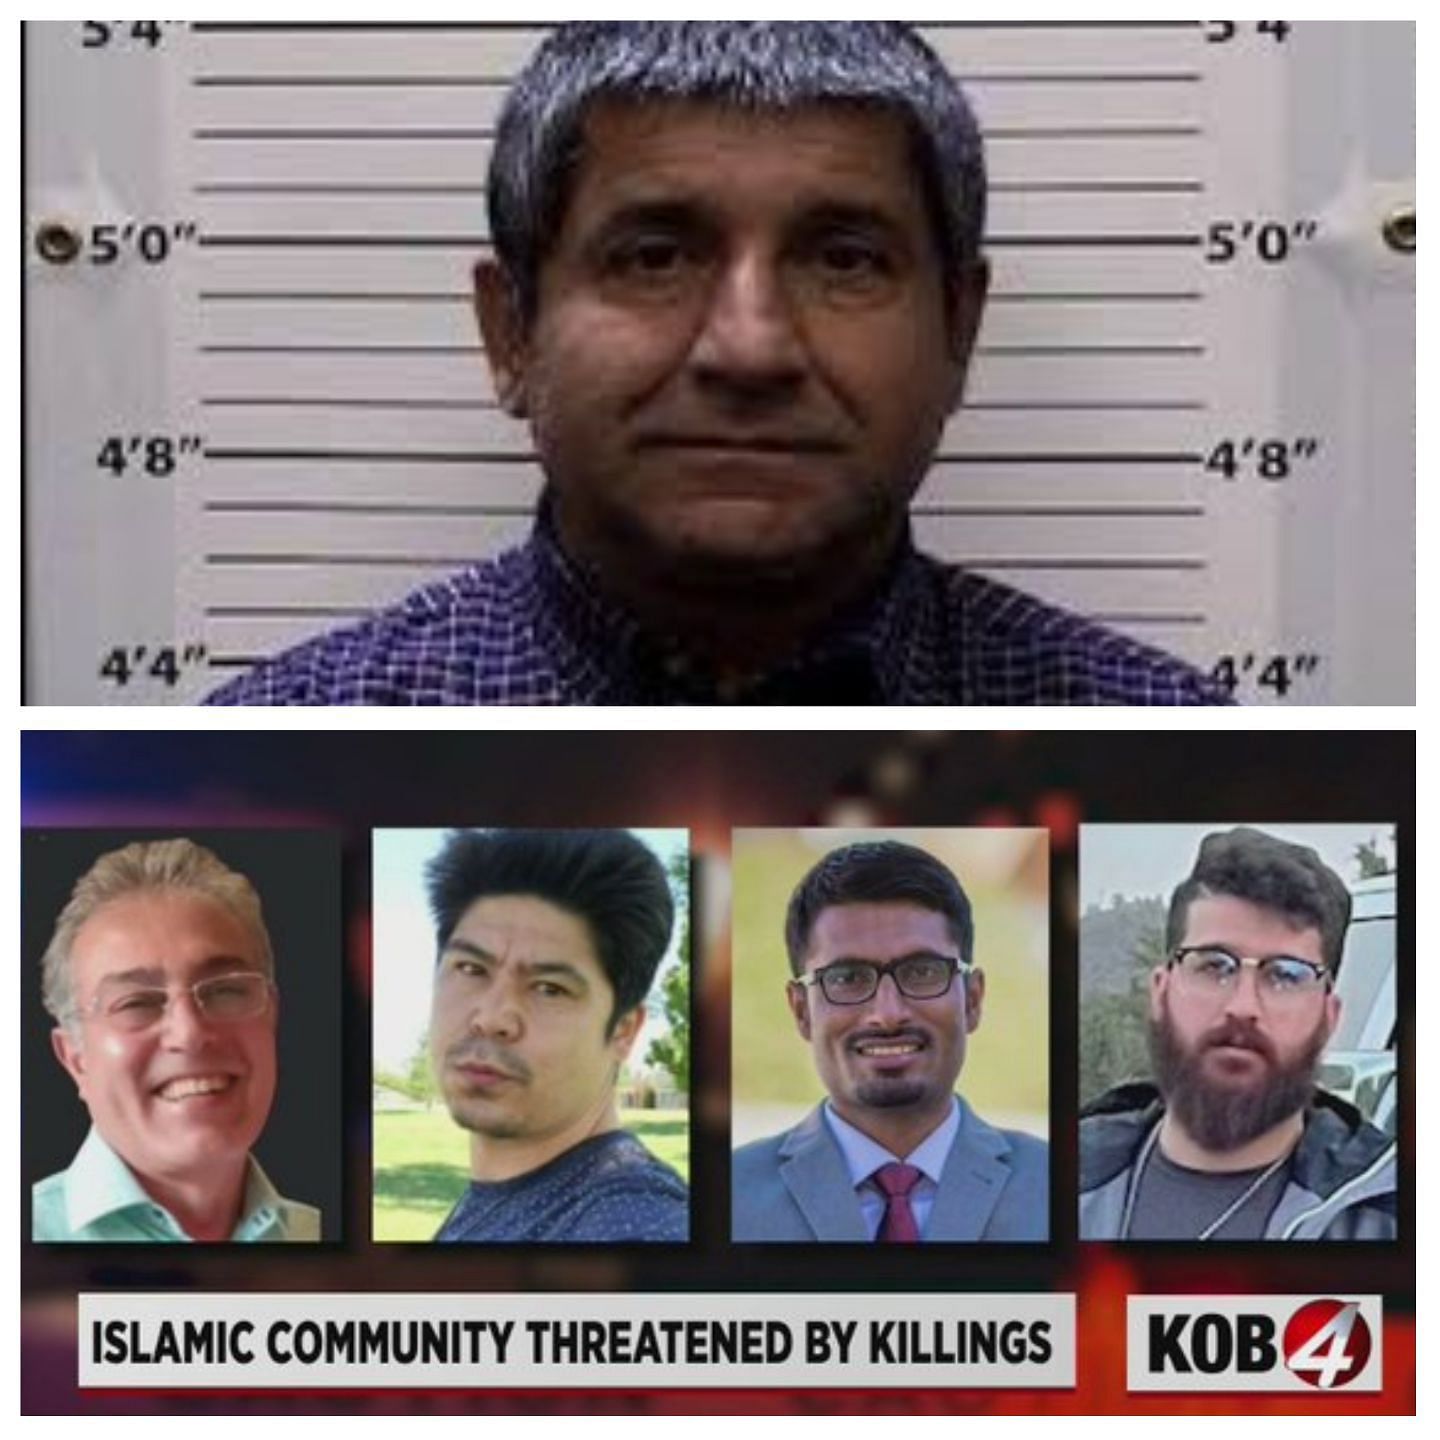 Muhammad Syed (top) is suspected of Albuquerque killings of Muslim men (bottom) arrested by police (Image via Twitter/DebbiAlmontaser/MrAndyNgo)